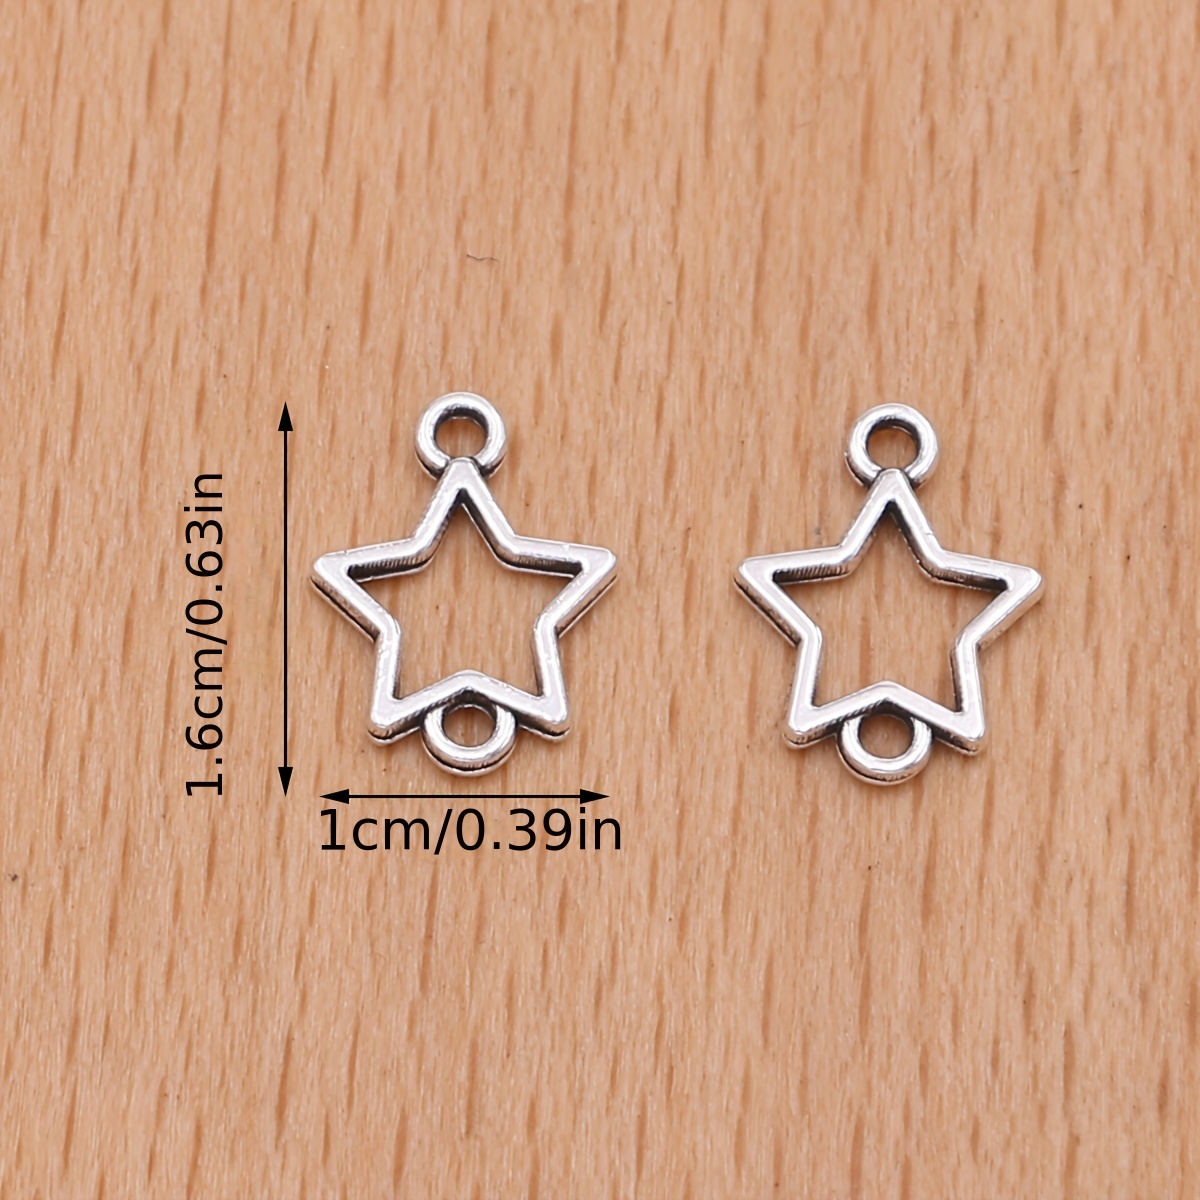 20 Tiny Star Charms, Antique Silver Tone Charms (A-217)